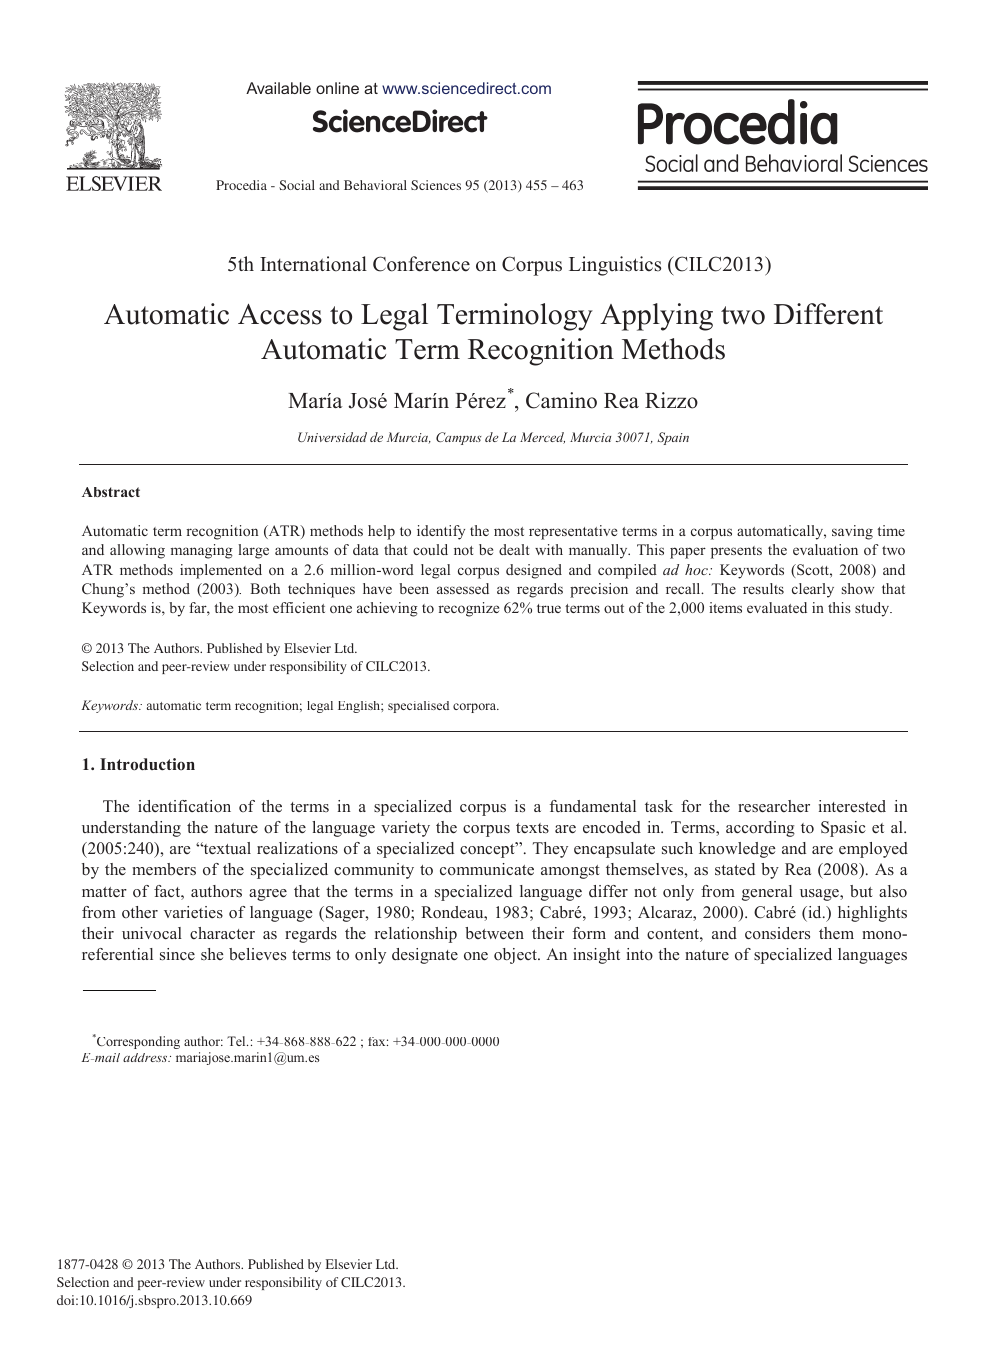 Automatic Access To Legal Terminology Applying Two Different Automatic Term Recognition Methods Topic Of Research Paper In Computer And Information Sciences Download Scholarly Article Pdf And Read For Free On Cyberleninka